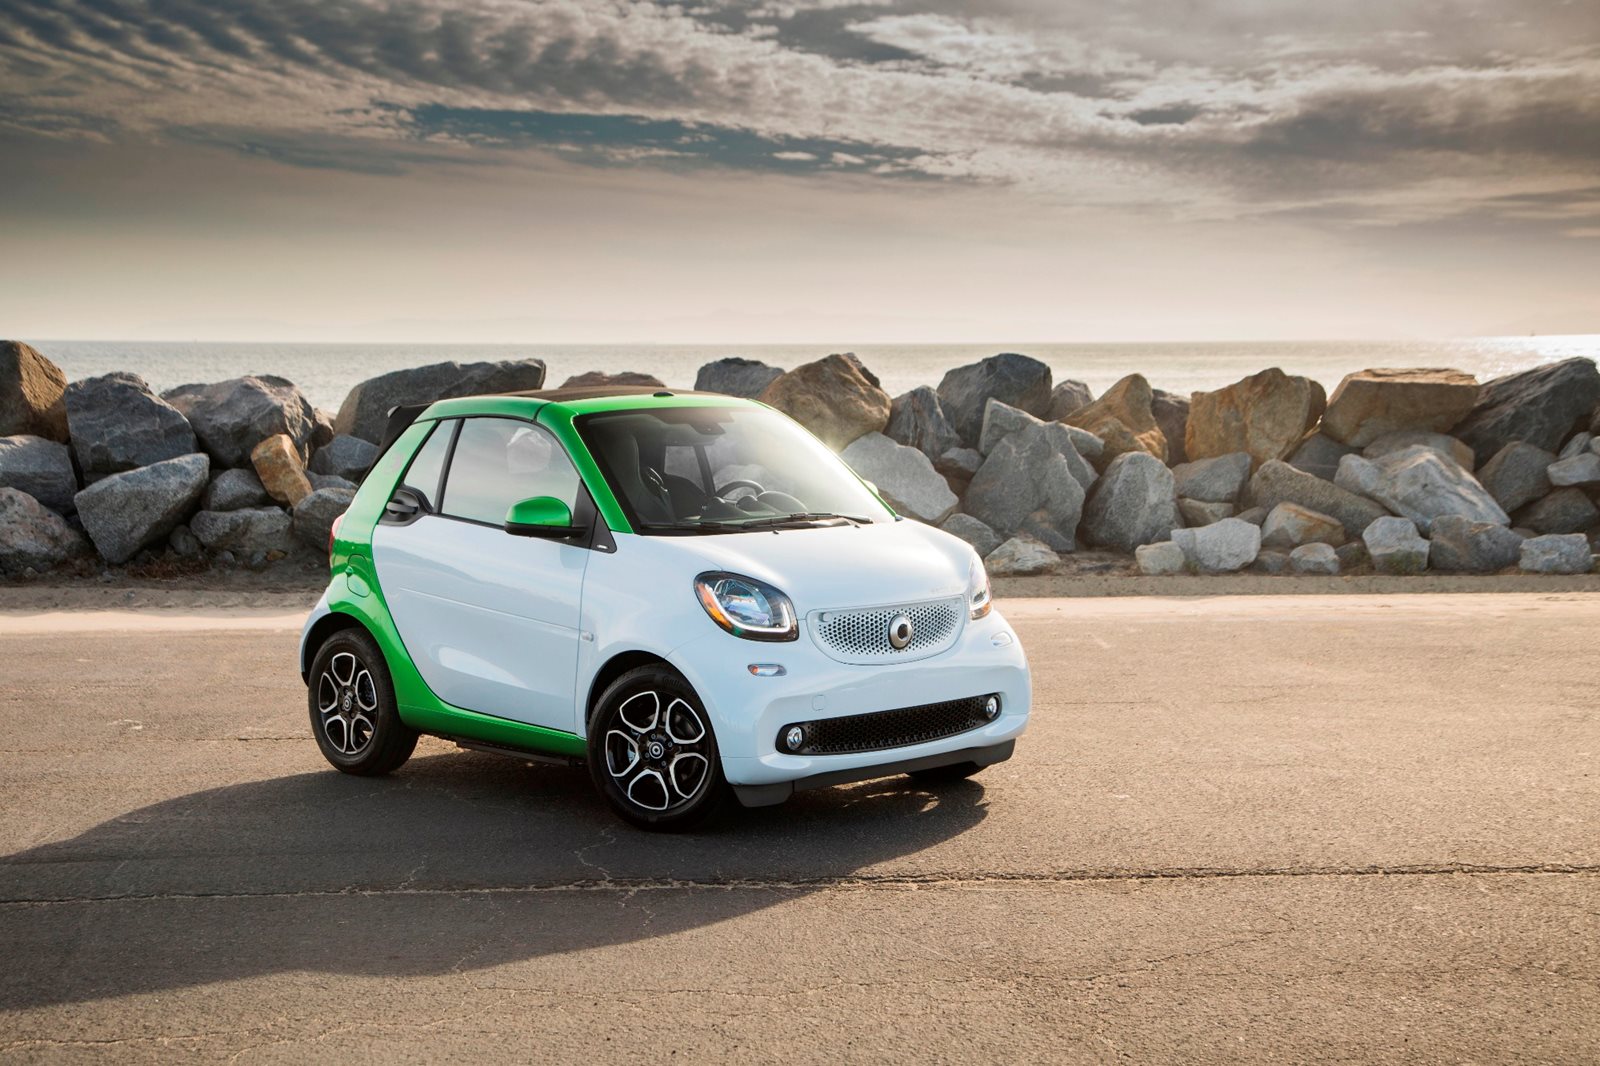 First Drive: 2017 Smart ForTwo Cabrio Electric Drive